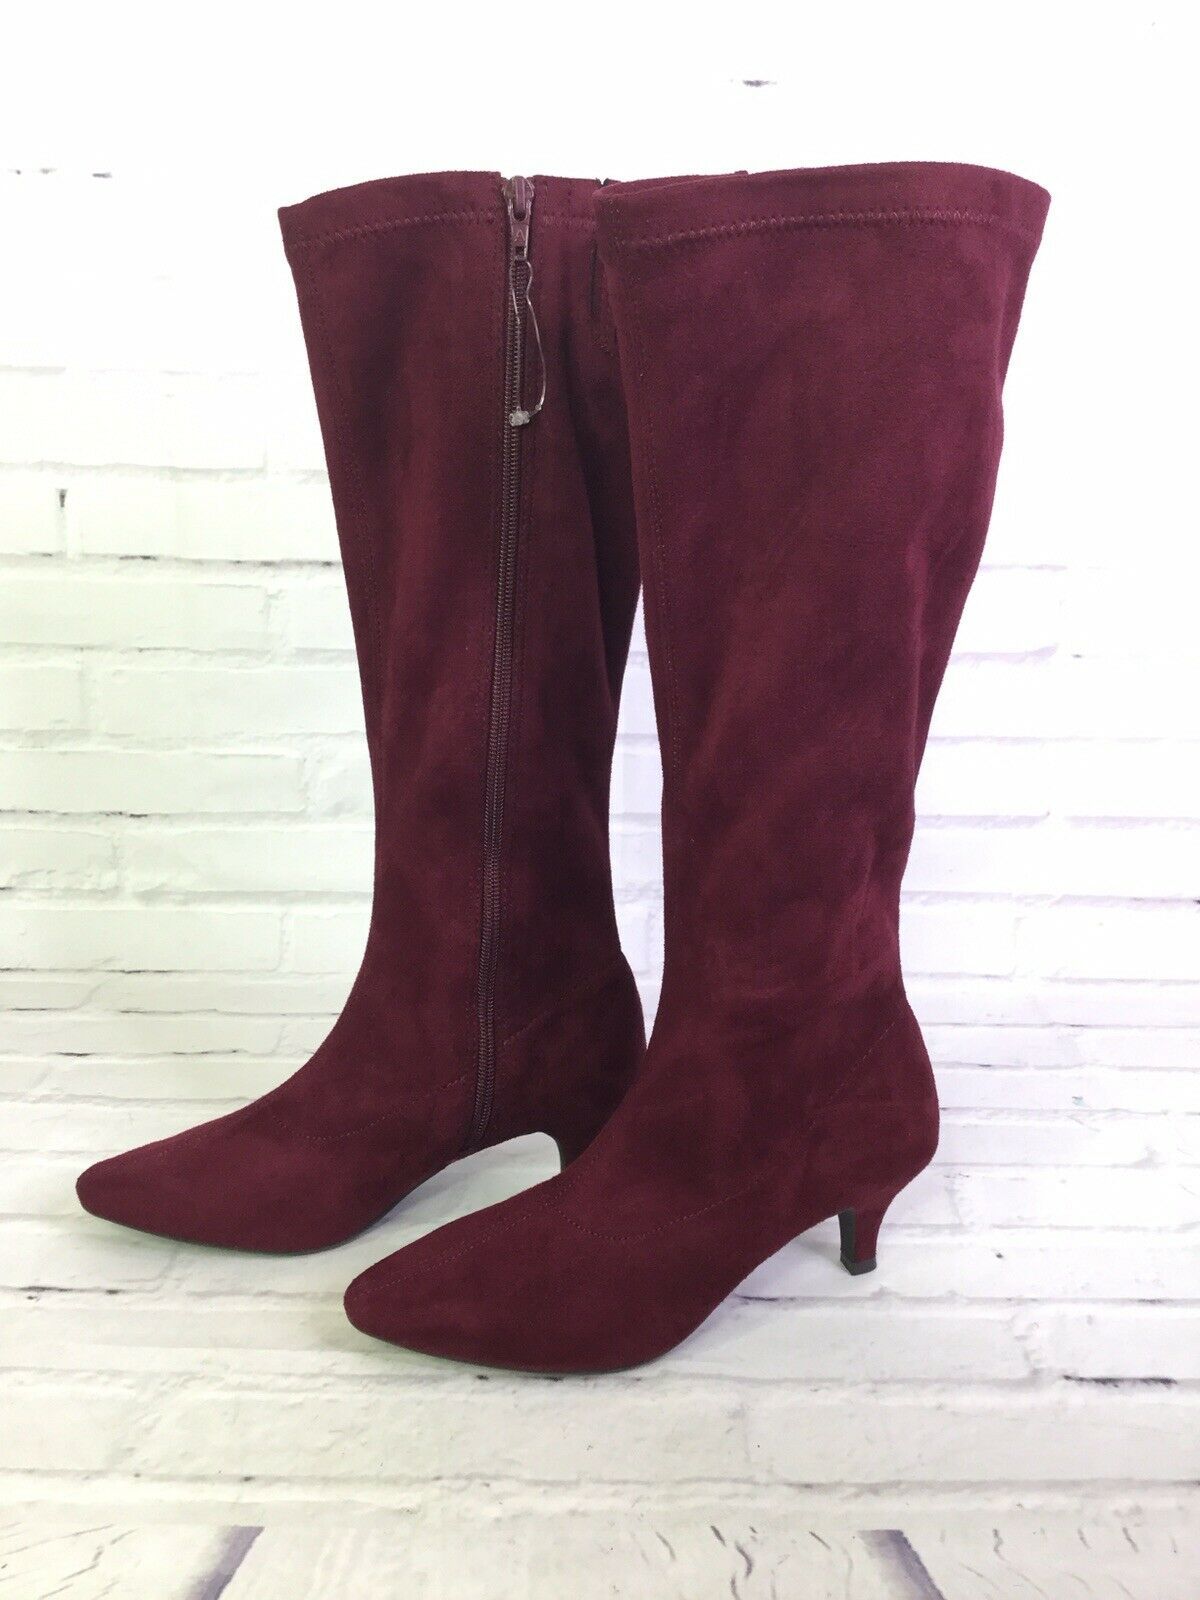 Aerosoles Women's Size 5.5 Afterward Boot Wine Red Fabric Knee High Boots - $69.29